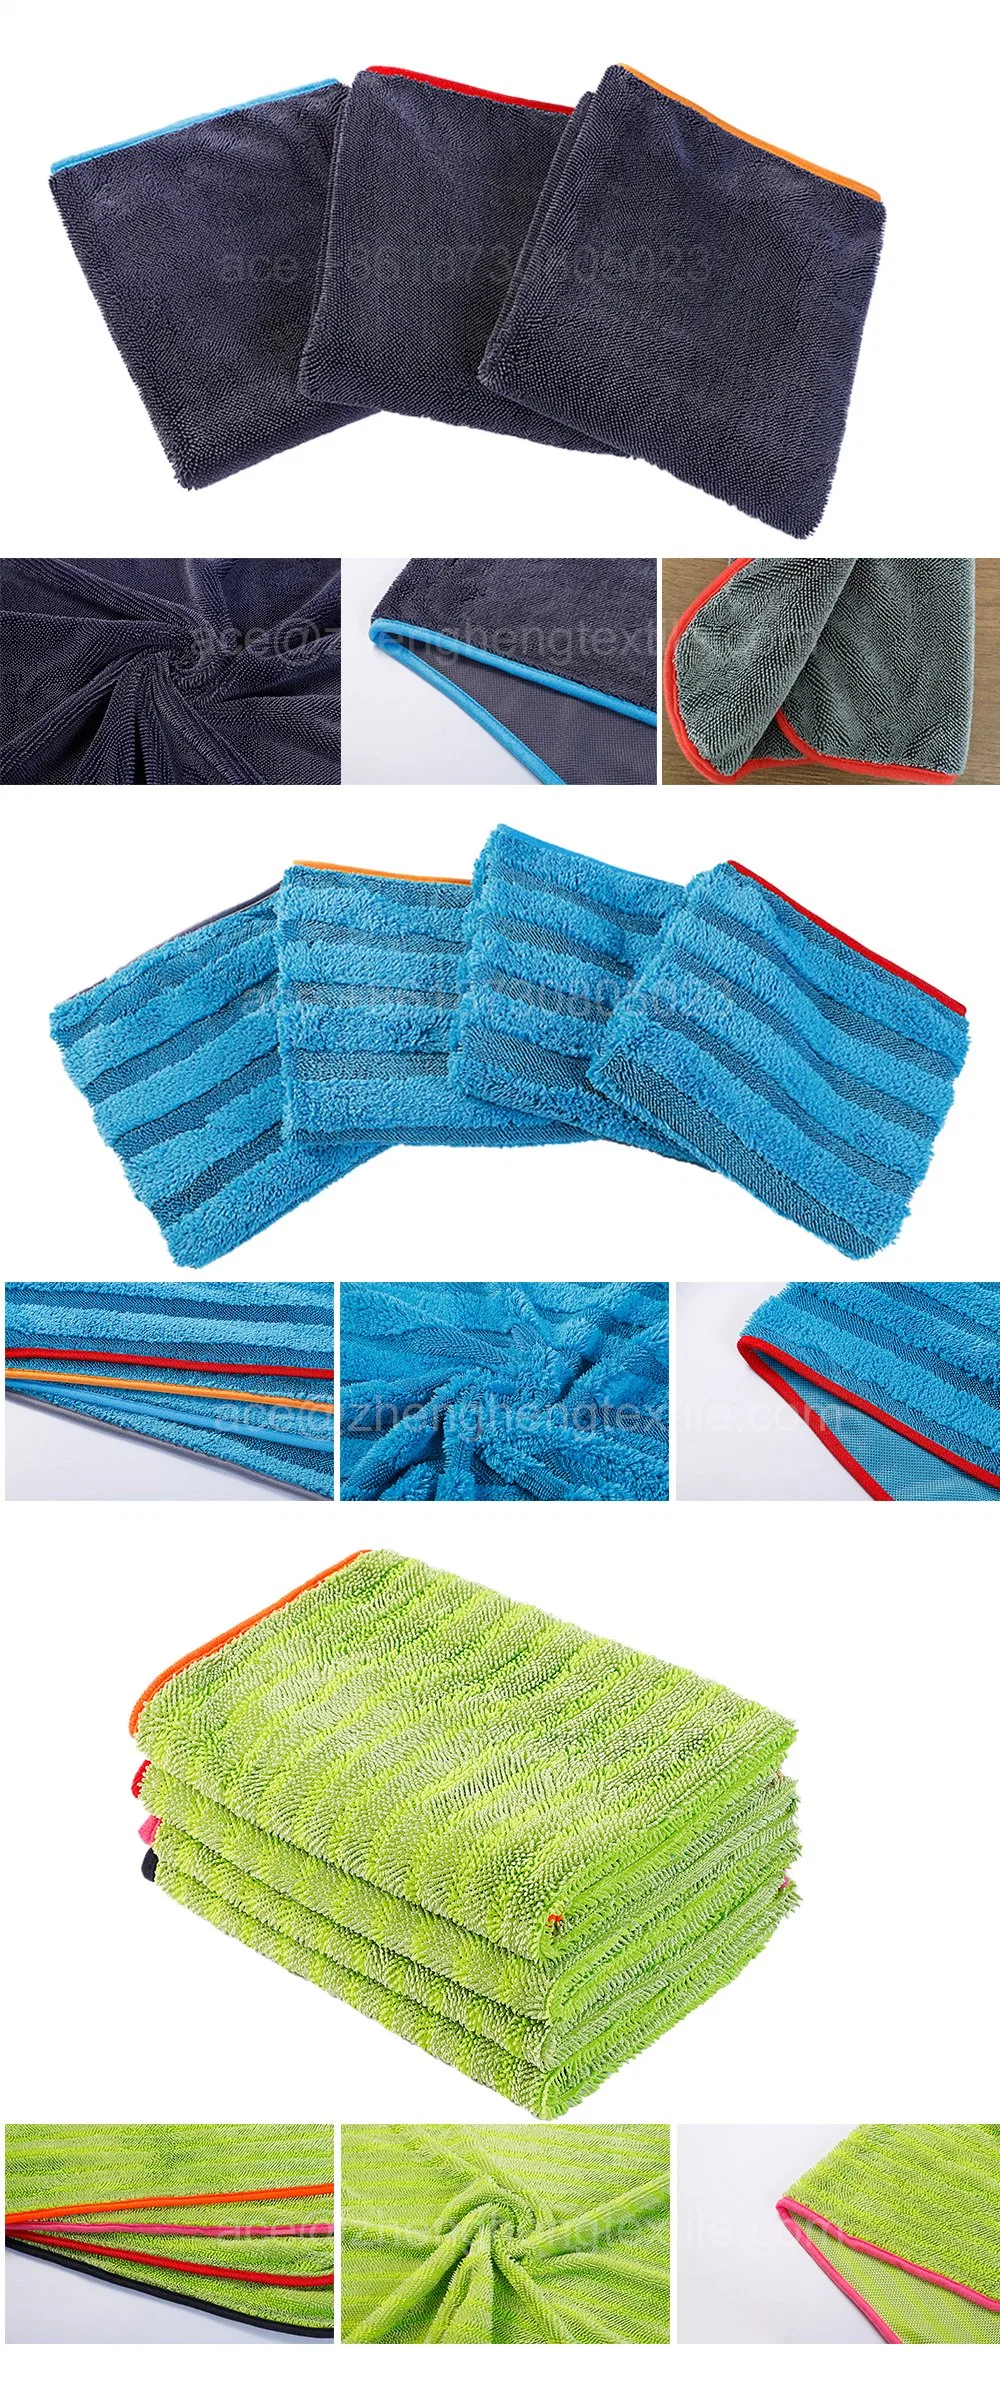 High Quality Hot Sale Absorbent Microfiber Car Cleaning Towel Household Car Care Cloth All-Purpose Softer Lint Free-Streak Free Wash Cloth for House, Car, Pet